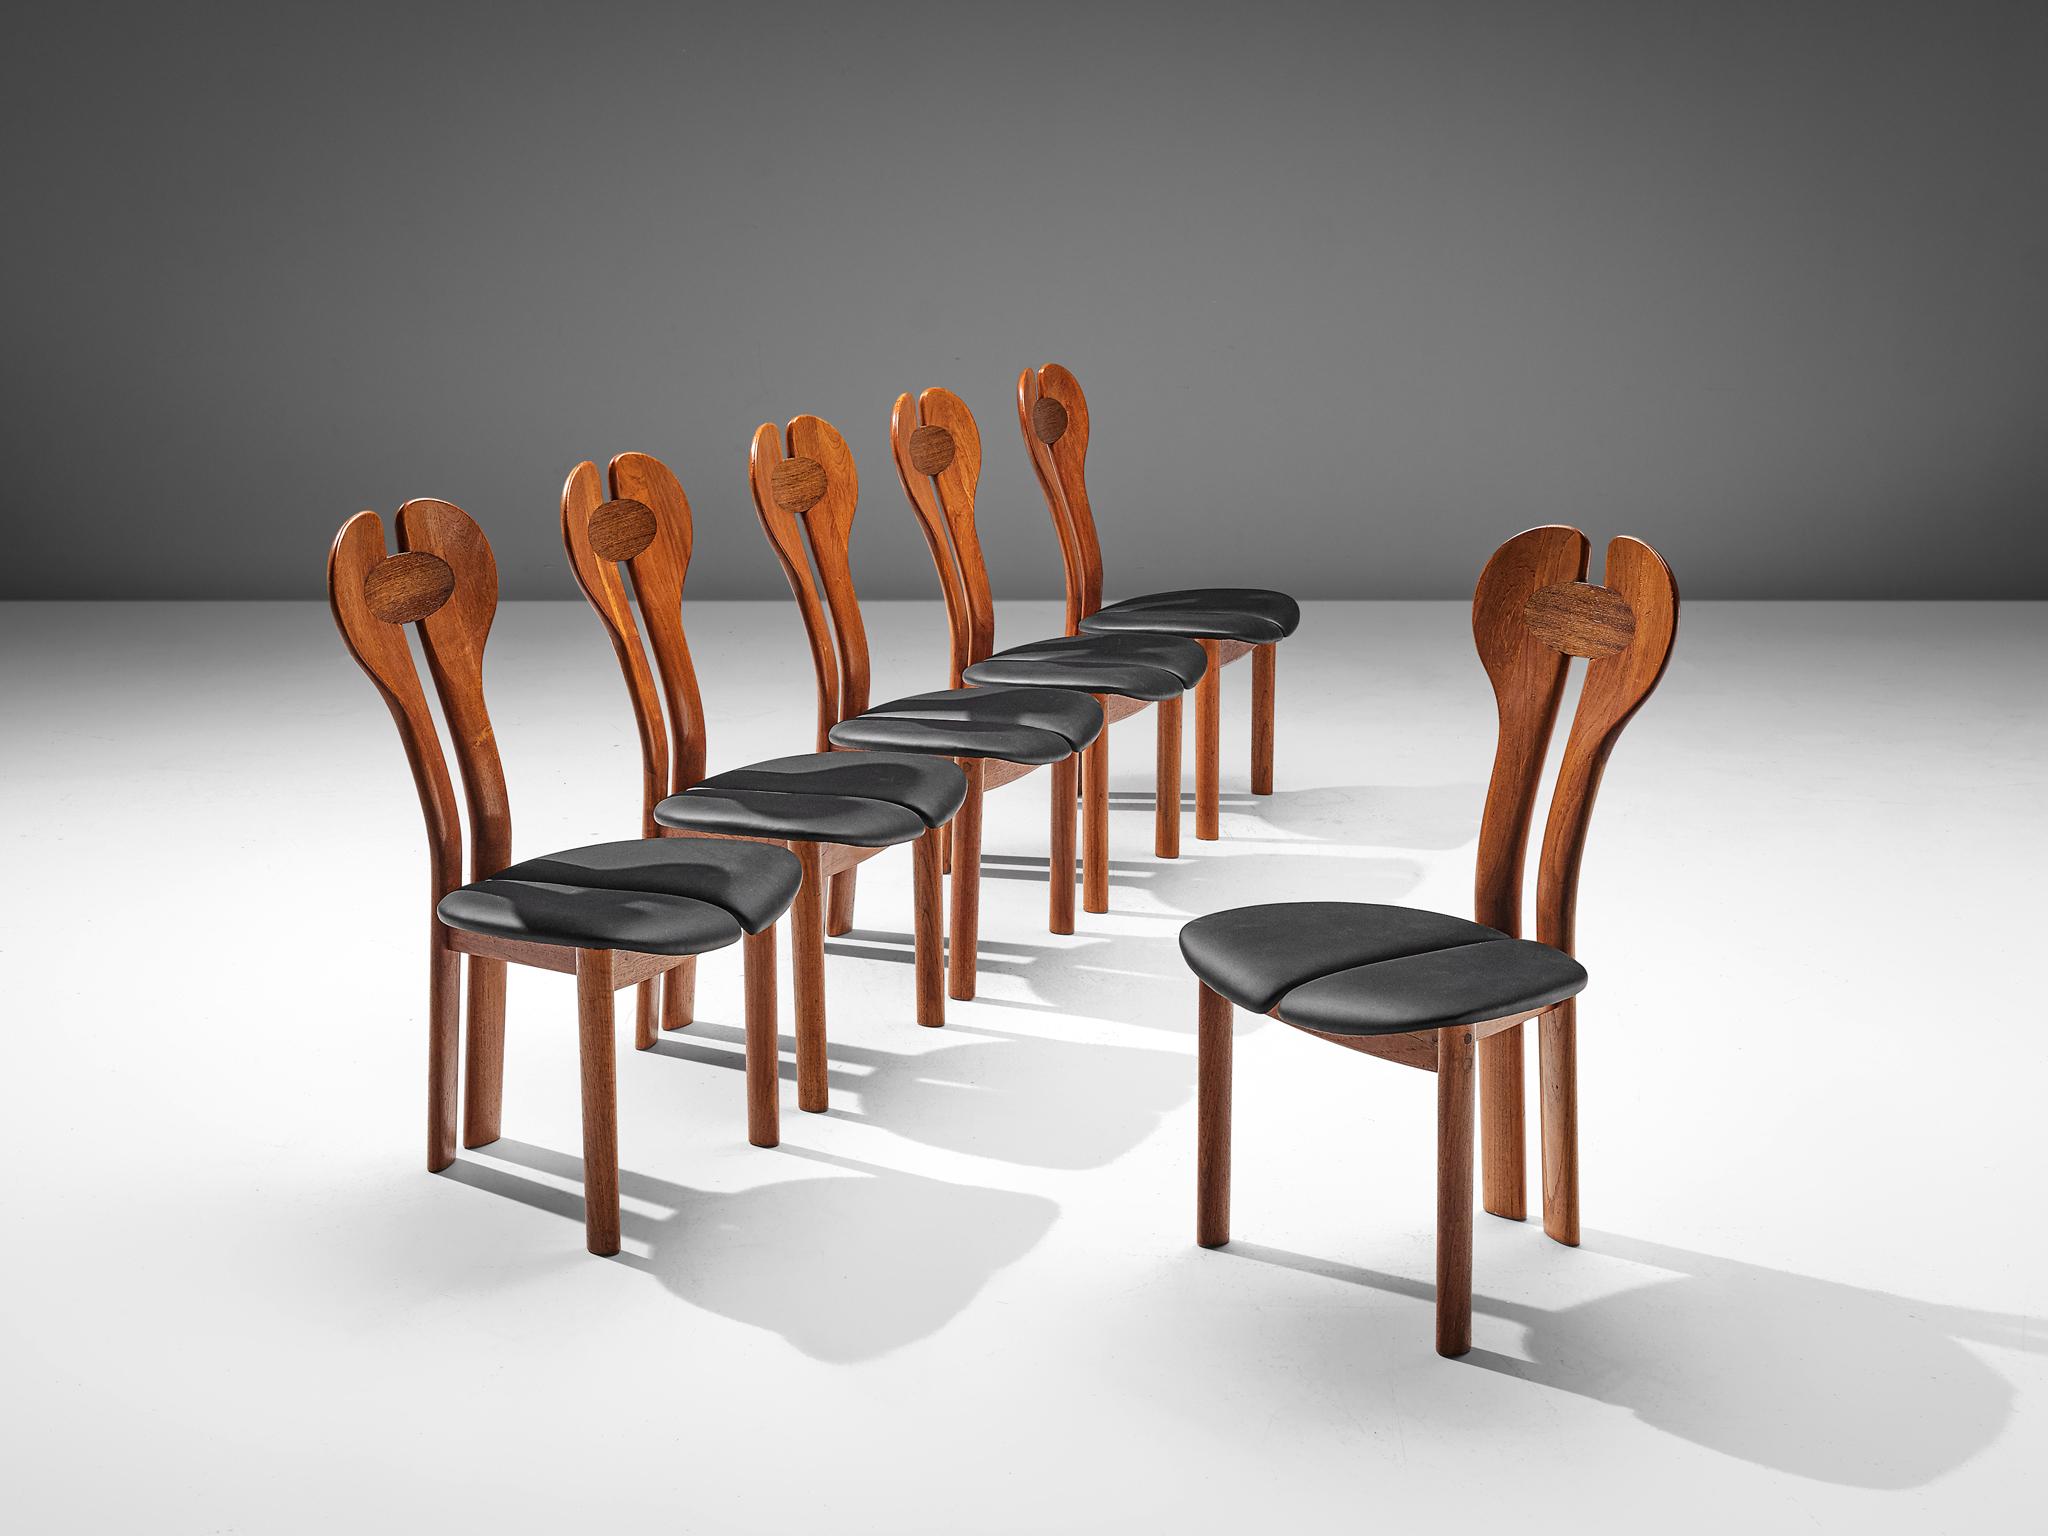 Set of six dining chairs, teak, Wenge and leather, Denmark, circa 1960.

A sculptural set of six Danish modern dining chairs. The capricious frame with a remarkable backrest consists of two parts, starting as the hind legs that flow over in the